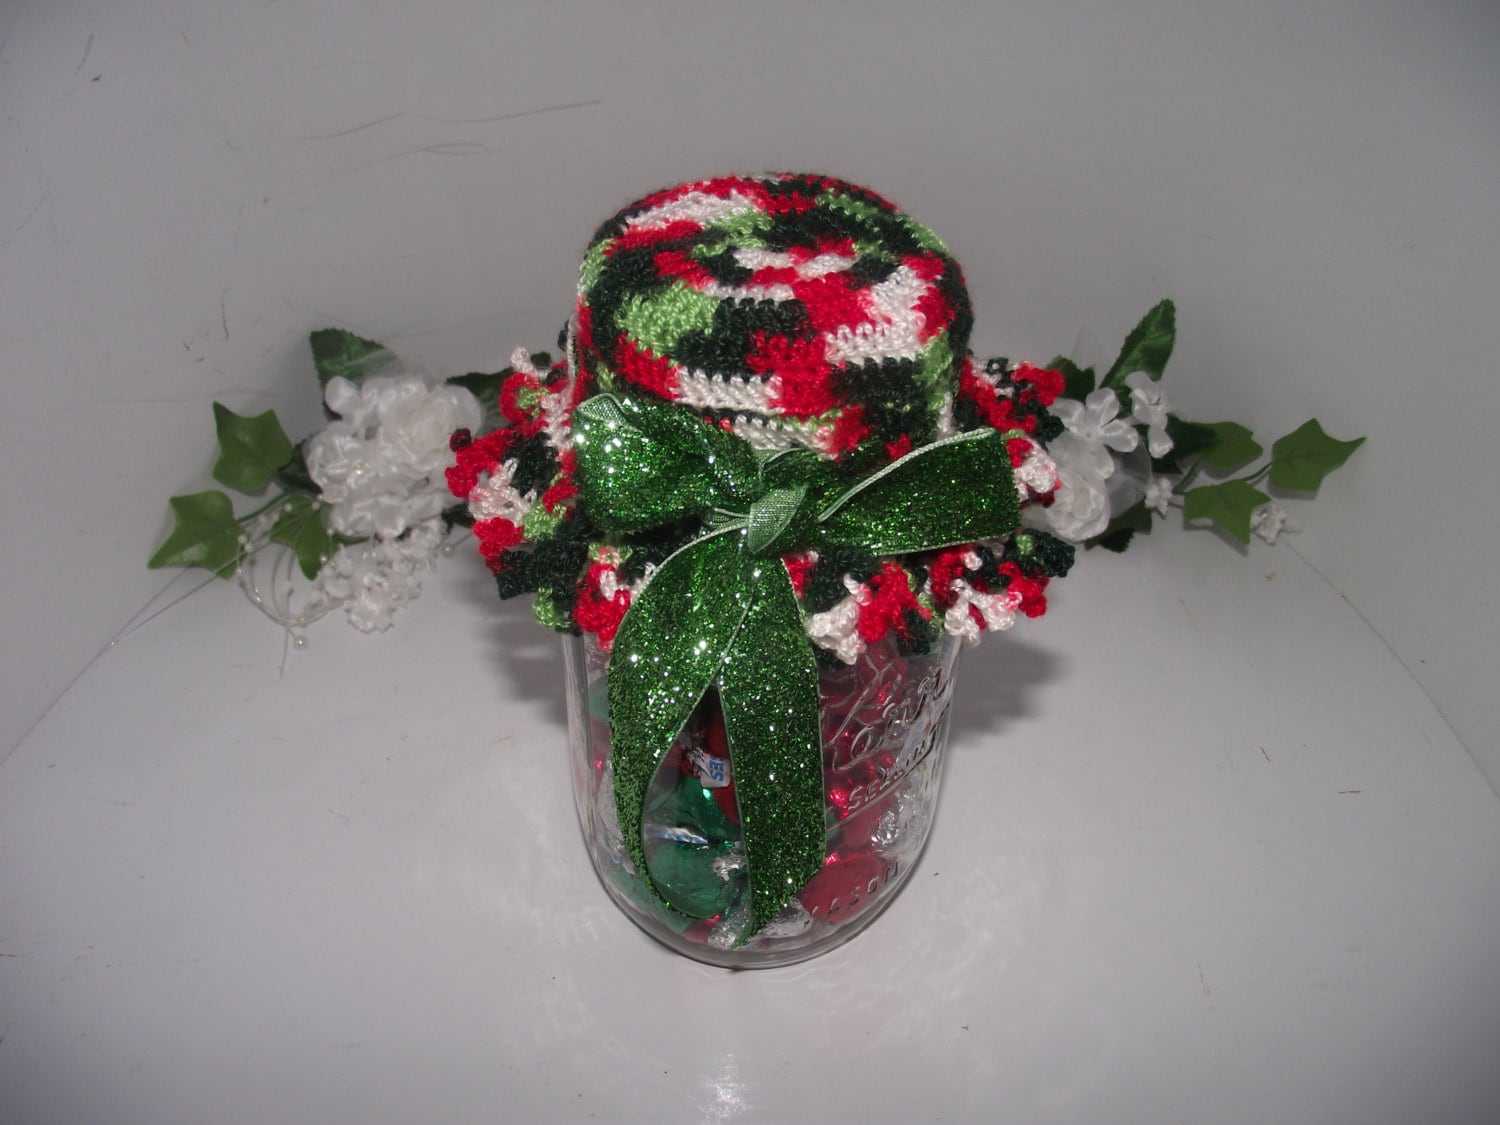 Crochet Christmas jar lid covers with a sparkle ribbon